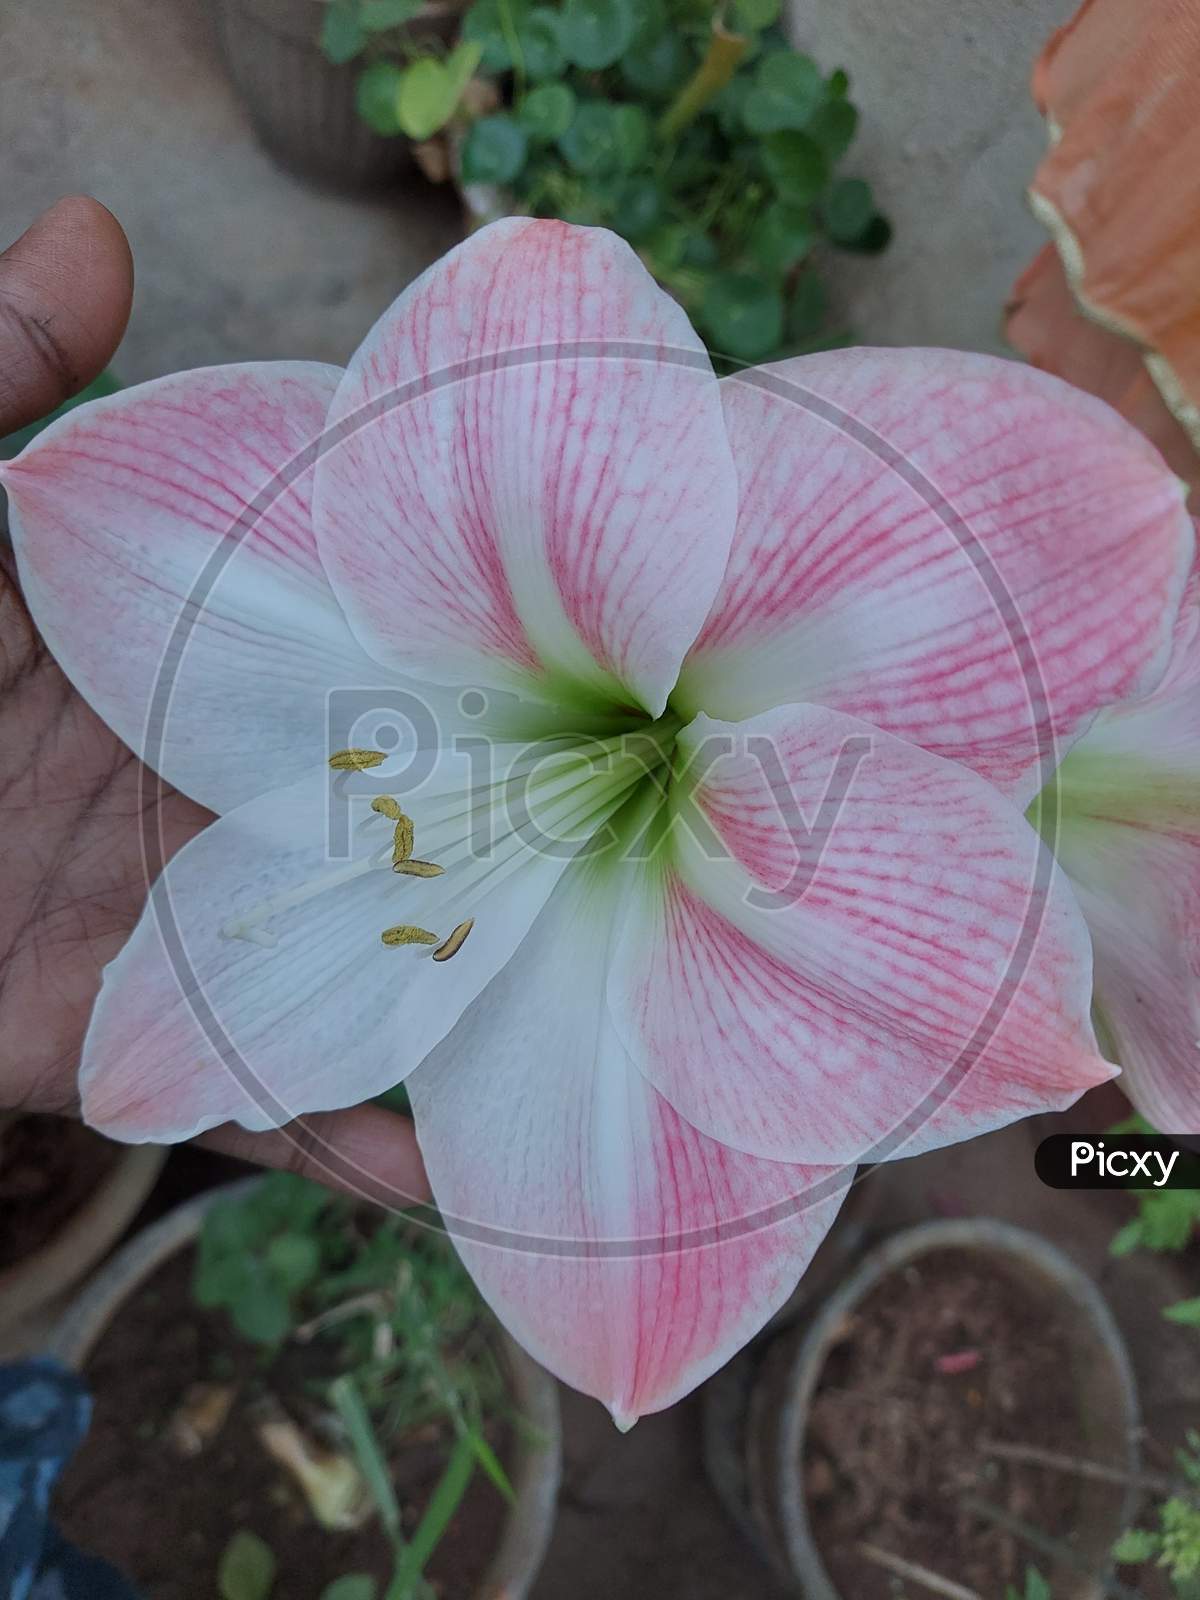 White and Pink Lilly flowers are beautifully blooming in the garden, Lilium, lily.